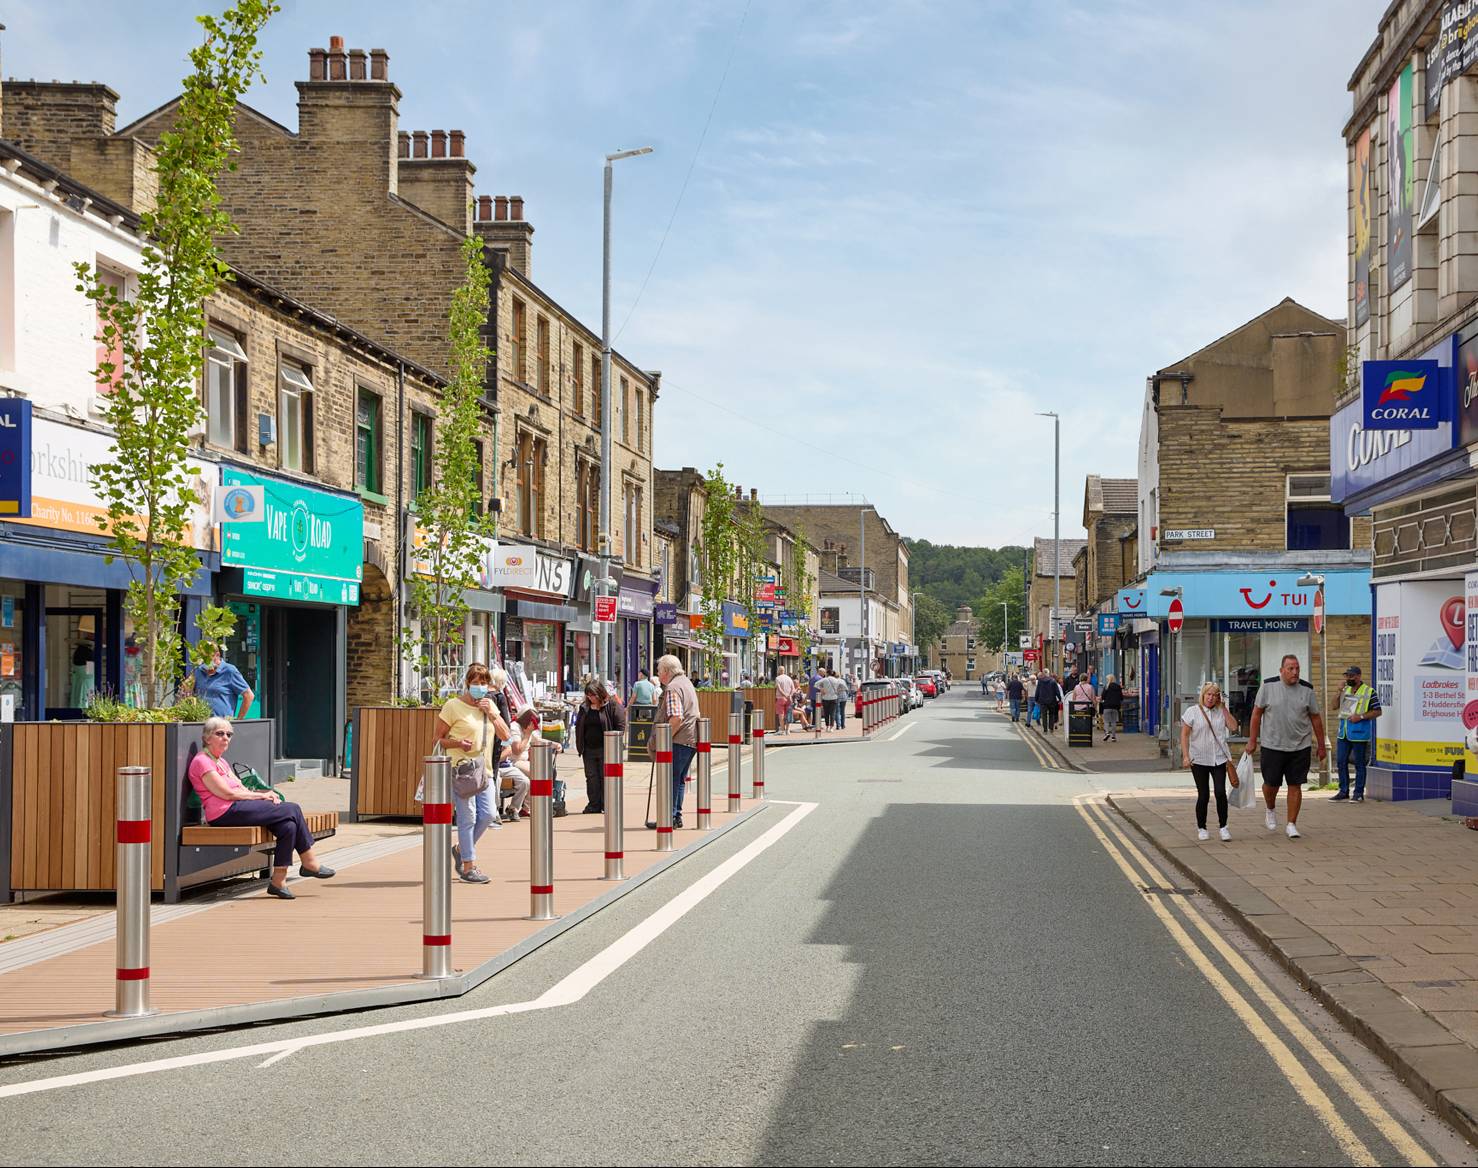 Commercial Street, Brighouse